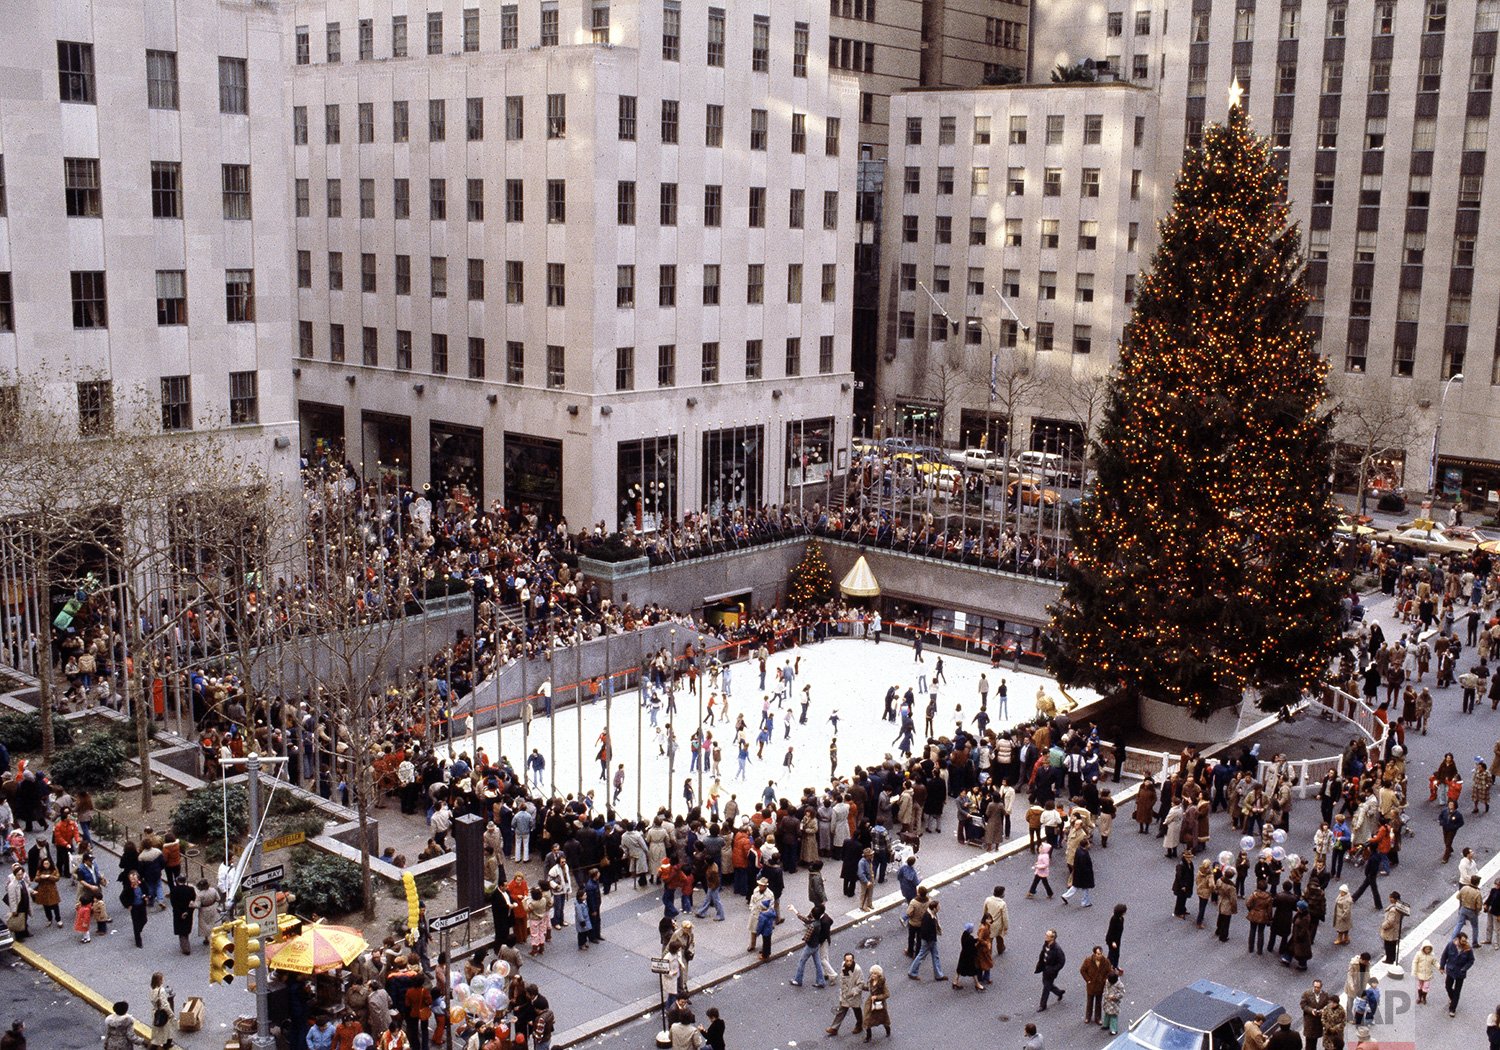  The Christmas tree towers over the ice skating rink at Rockefeller Center in New York City on Christmas Day, Dec. 25, 1979. (AP Photo/Marty Lederhandler) 